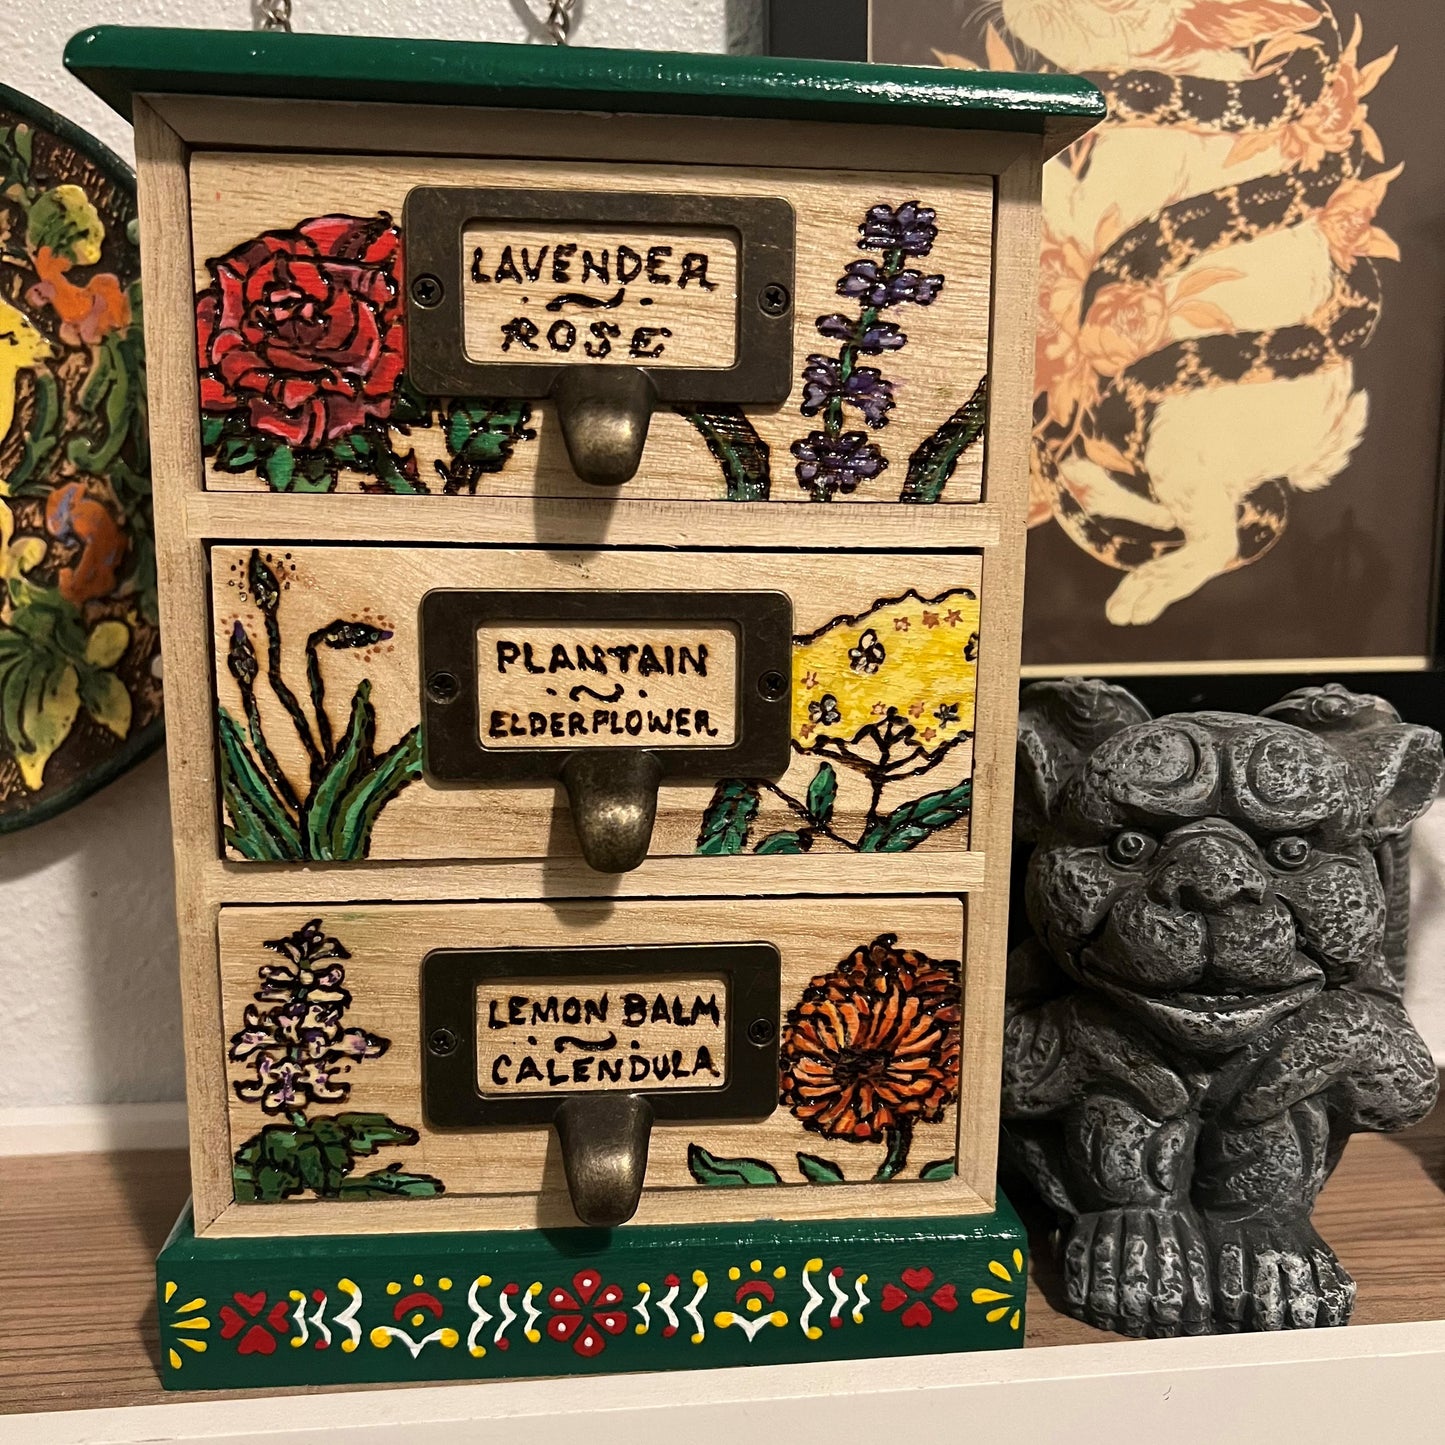 Apothecary Cabinet with Handmade Botanical Illustrations and Folk Art